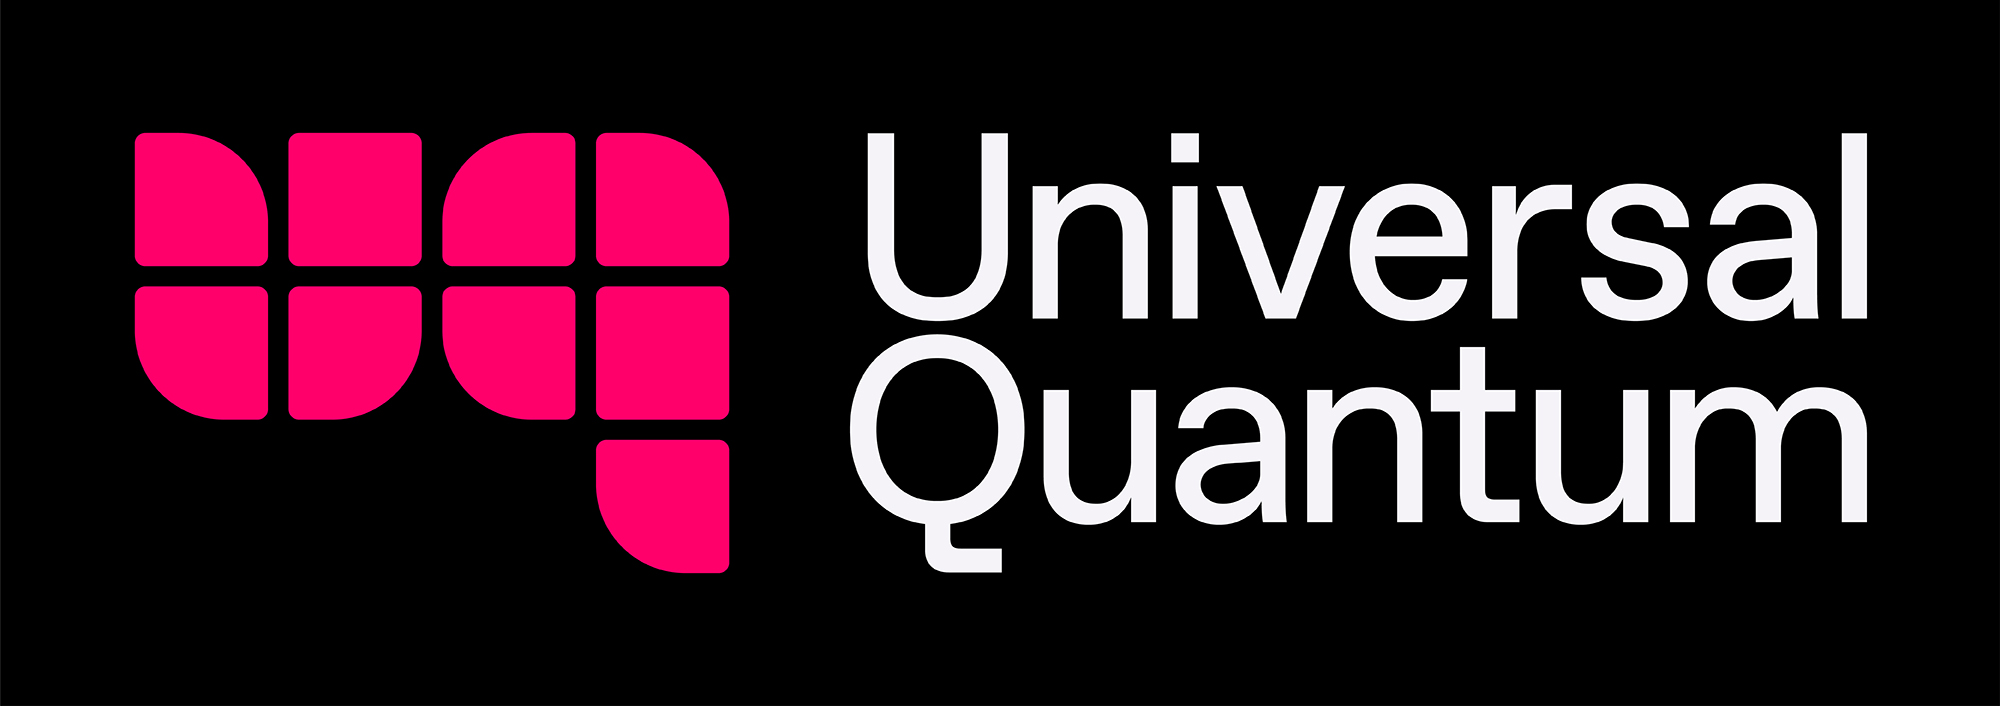 Shaping the future of quantum computing together: BMW Group and RWTH Aachen  University sign contract for “Quantum Information Systems” endowed chair.